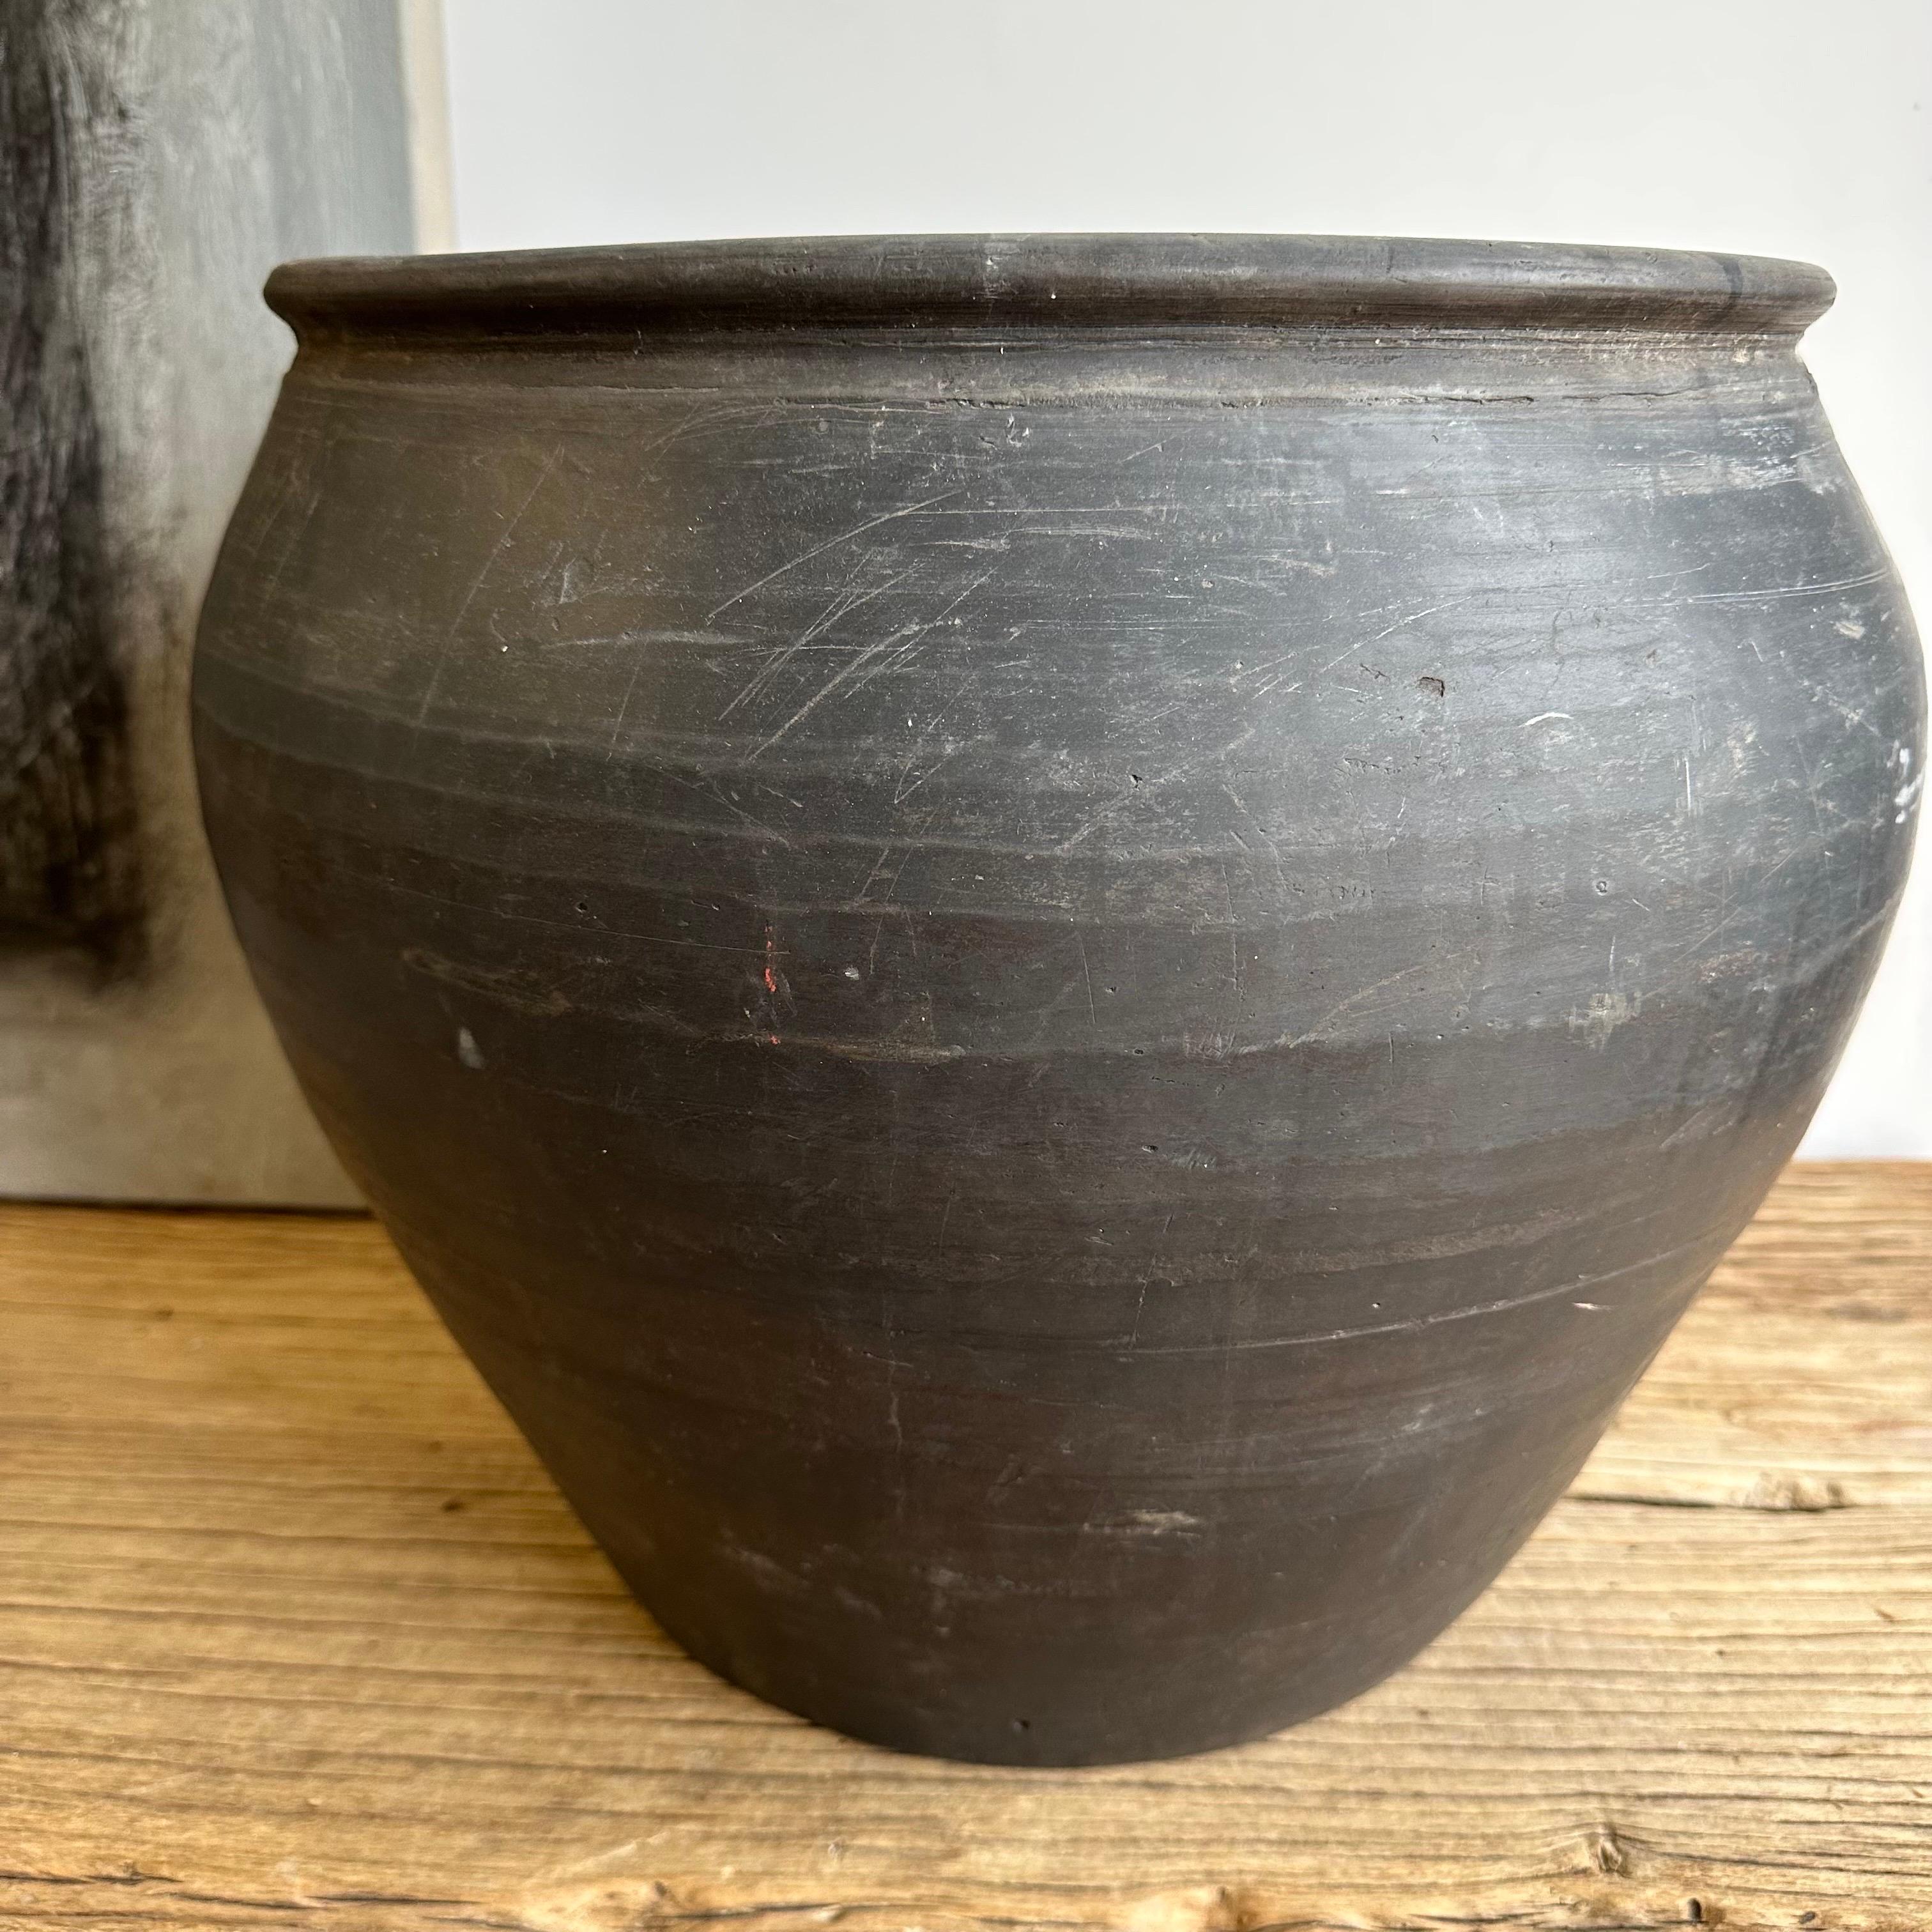 Vintage matte oil pots pottery beautifully terracotta rich in character, this vintage oil pot adds just the right amount of texture + warmth where you need it. Stunning matte finish with warm terra-cotta accents, brown and dark grey tones. Each